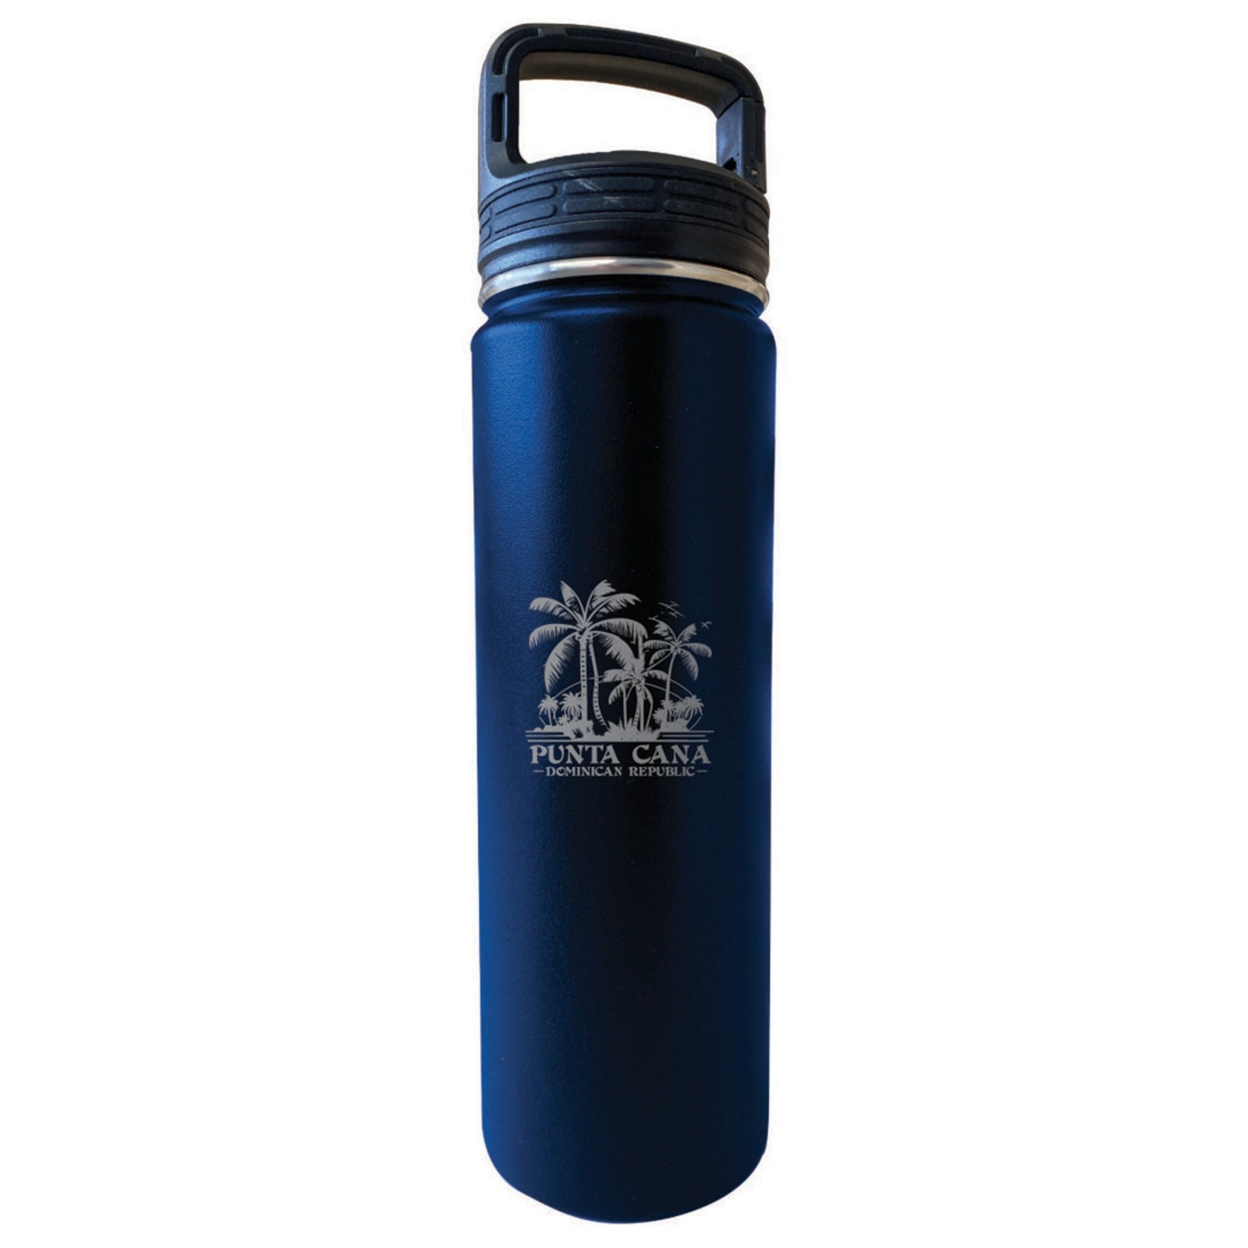 Punta Cana Dominican Republic Souvenir 32 Oz Insulated Stainless Steel Tumbler - Navy, Palm